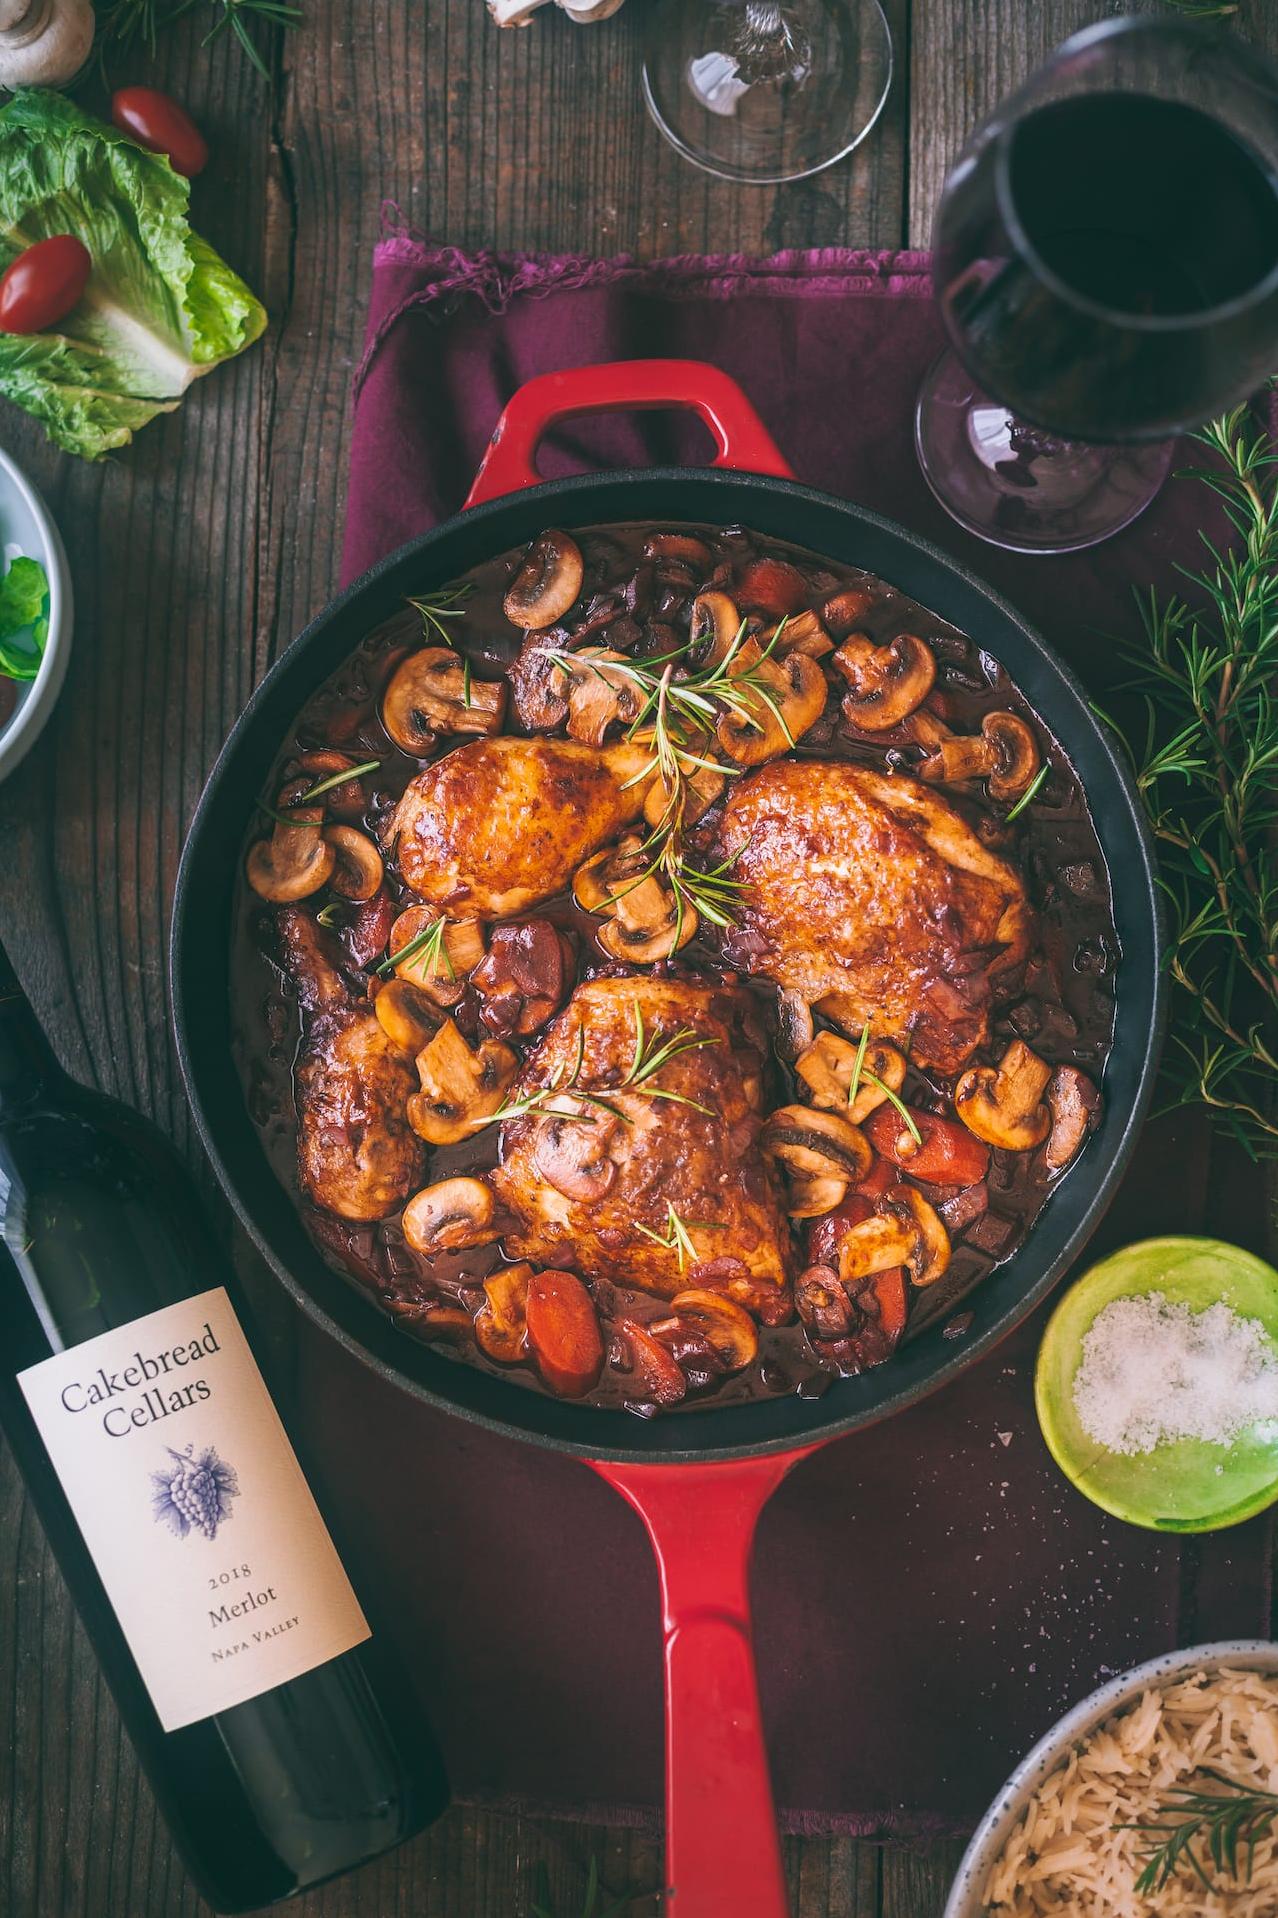  The chicken is cooked to juicy perfection in a flavorful red wine sauce.